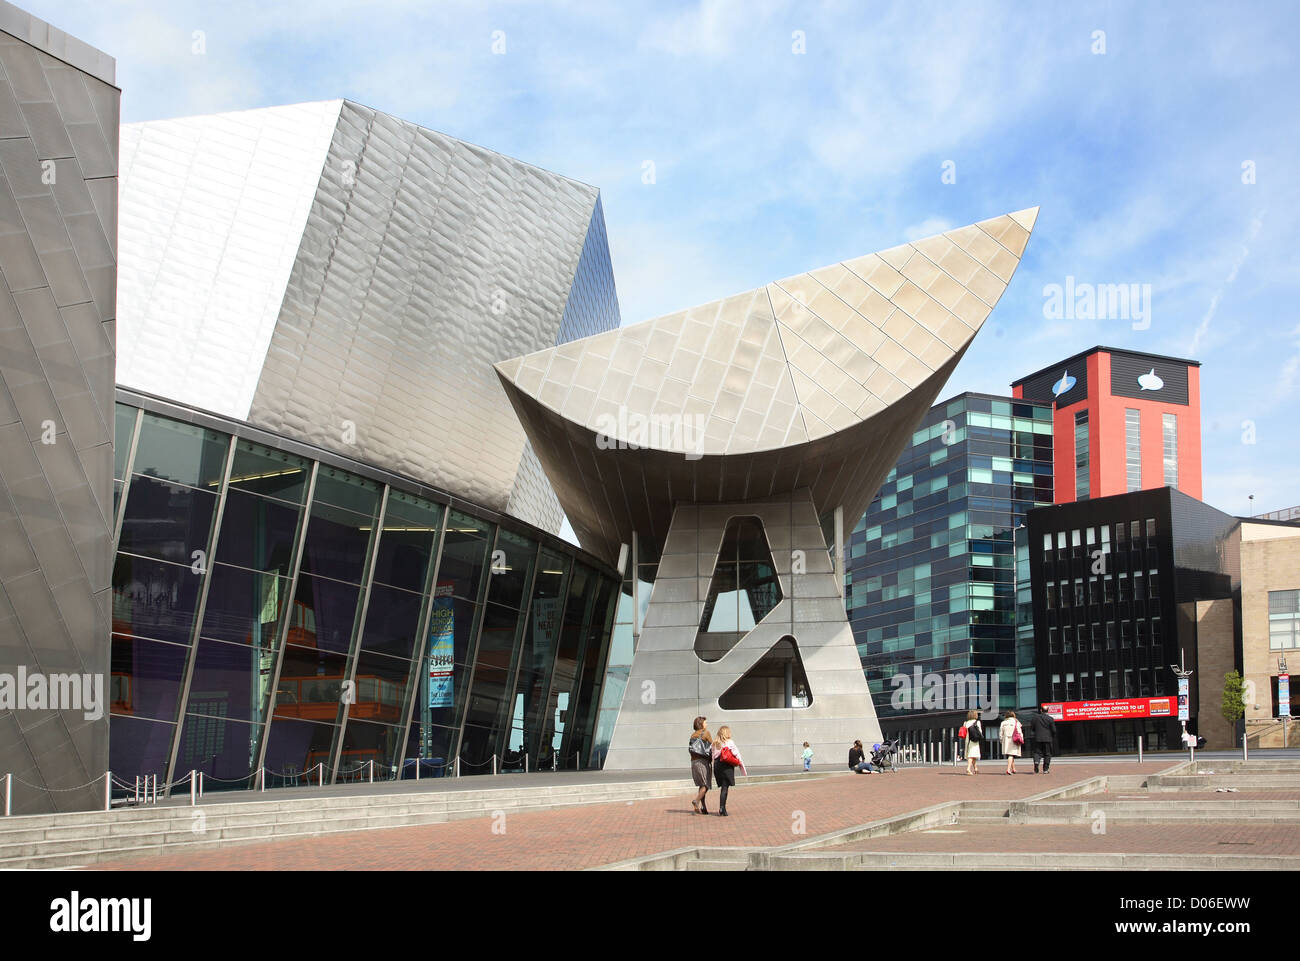 The Lowry Centre, Salford Quays, Manchester, UK. Arts centre designed by James Stirling and Michael Wilford opened in April 2000 Stock Photo